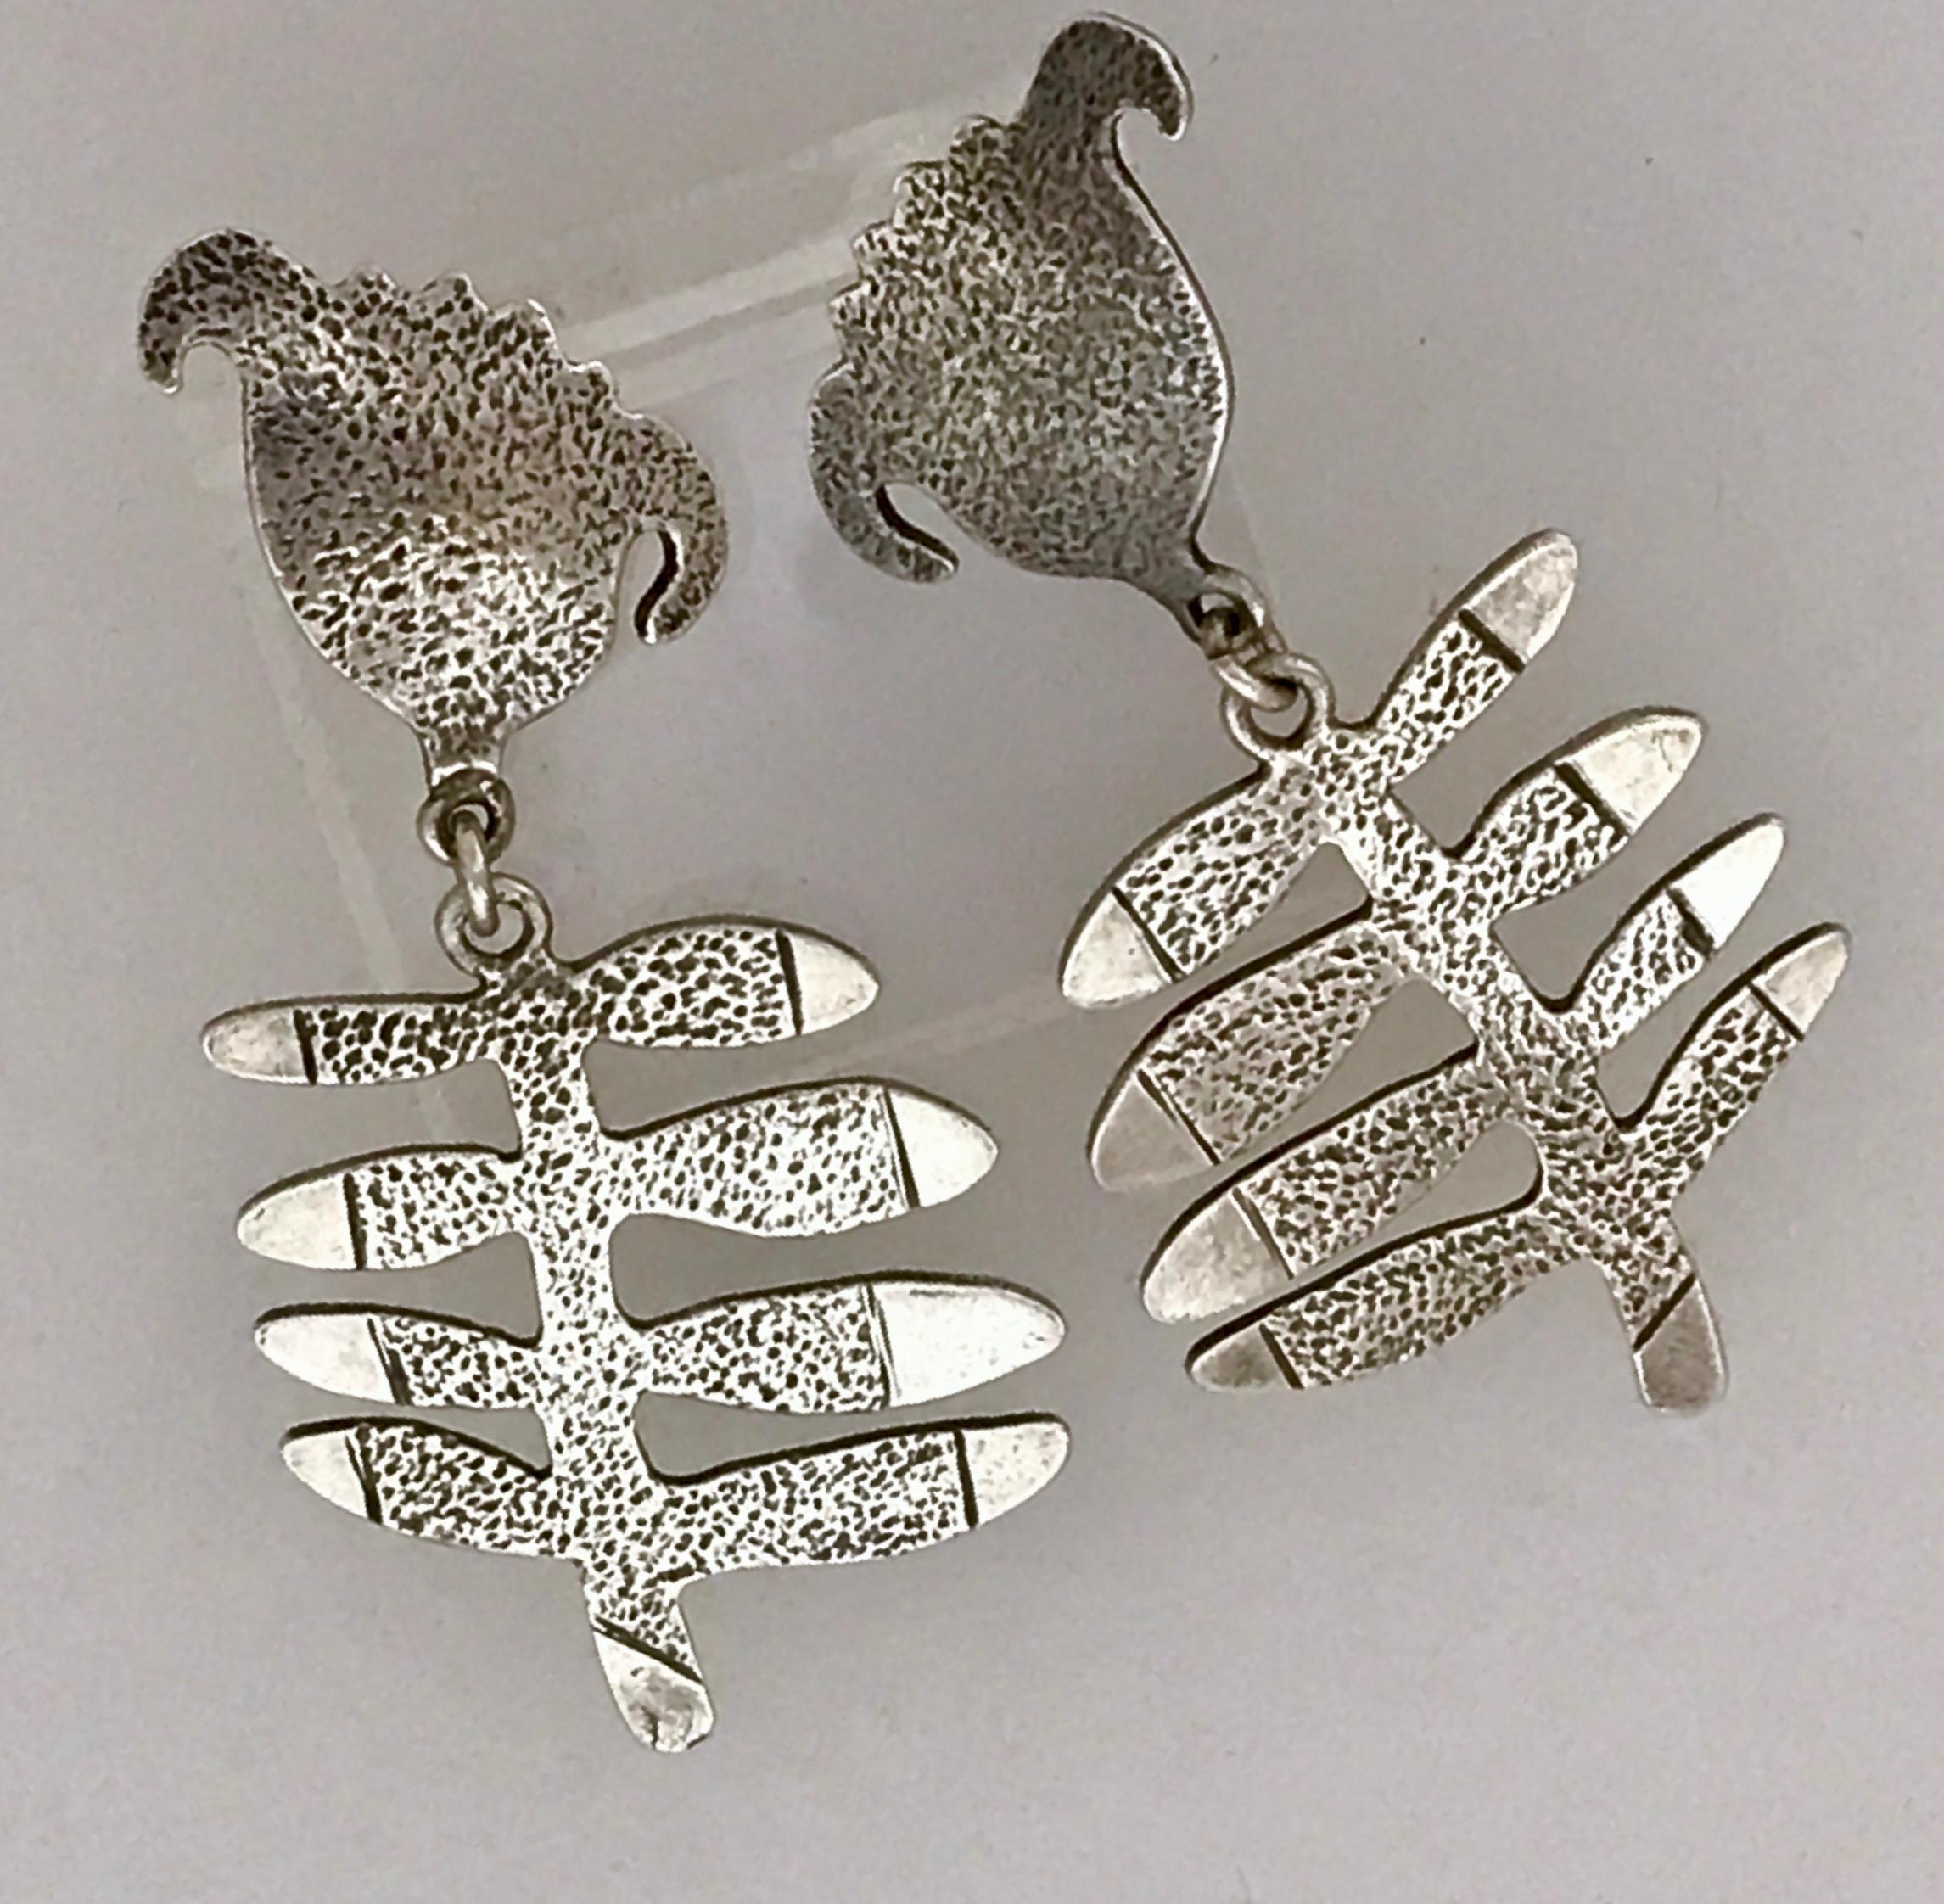 Flower earrings, cast, sterling silver, dangle earrings, Melanie Yazzie, flowers
The weight is the combined total of both earrings. 

Melanie A. Yazzie (Navajo-Diné) is a highly regarded multimedia artist known for her printmaking, paintings,